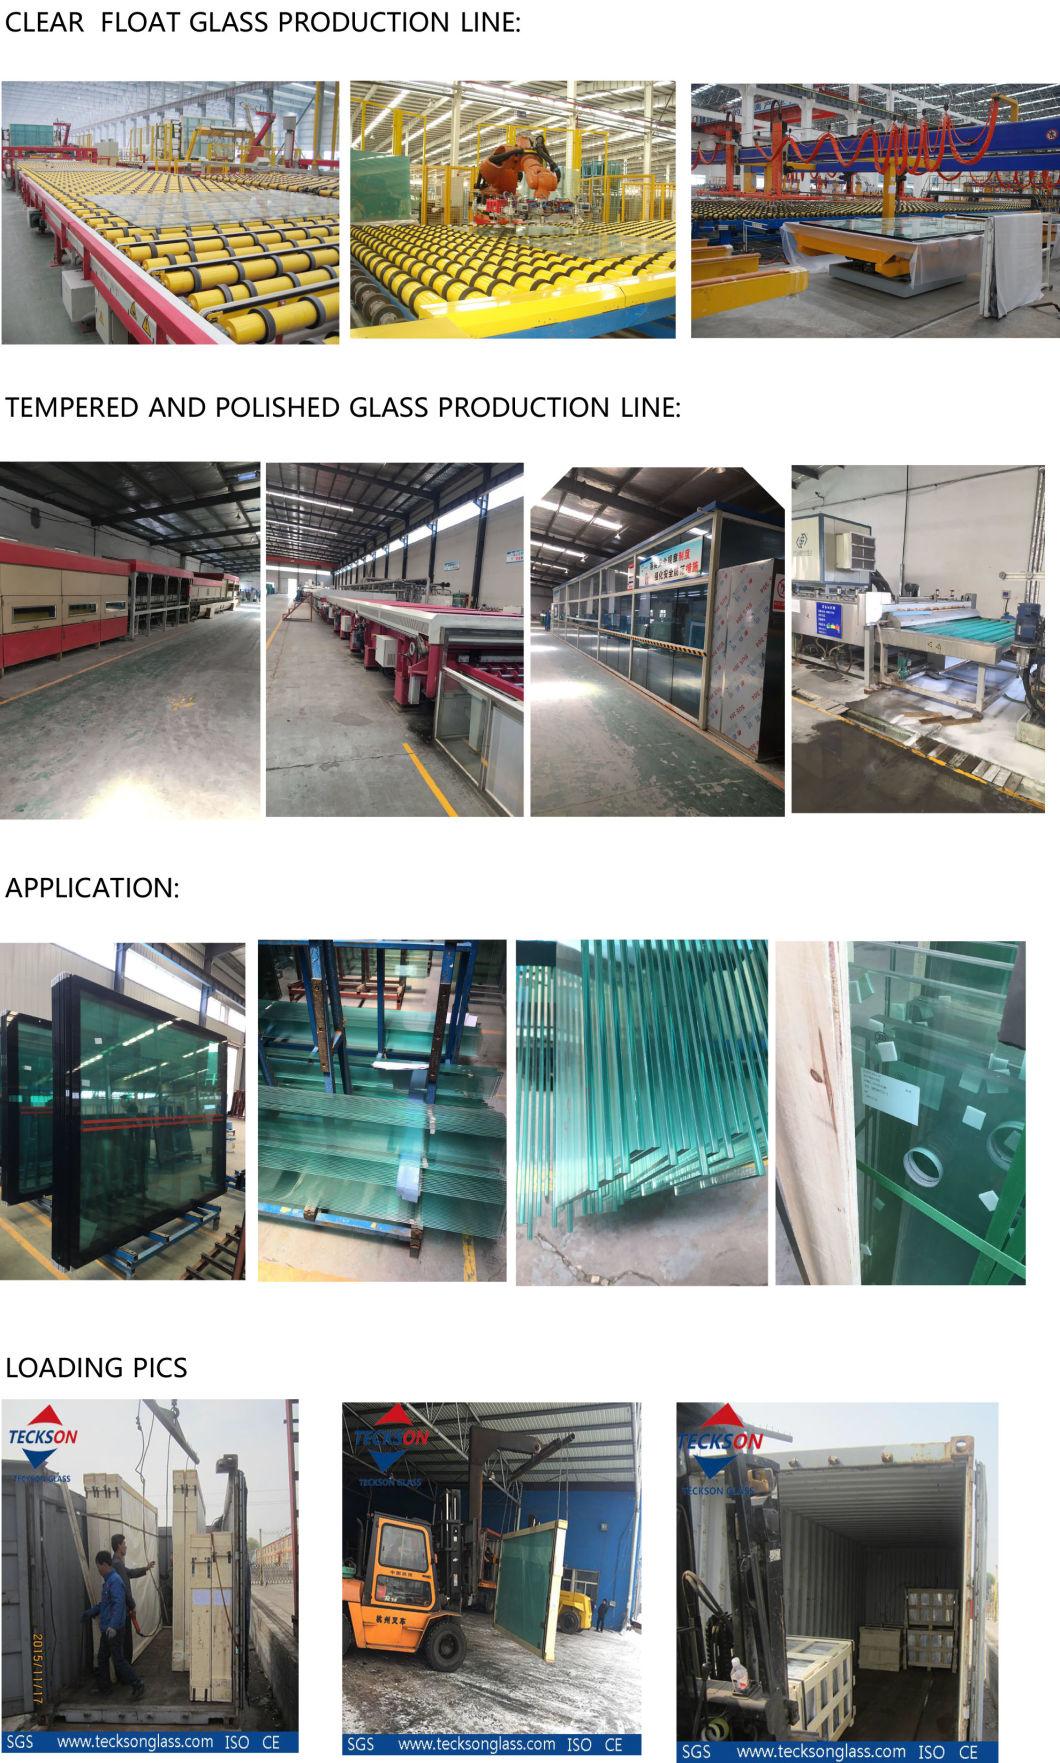 5mm Construction Building Ultra Clear Float Glass with CE